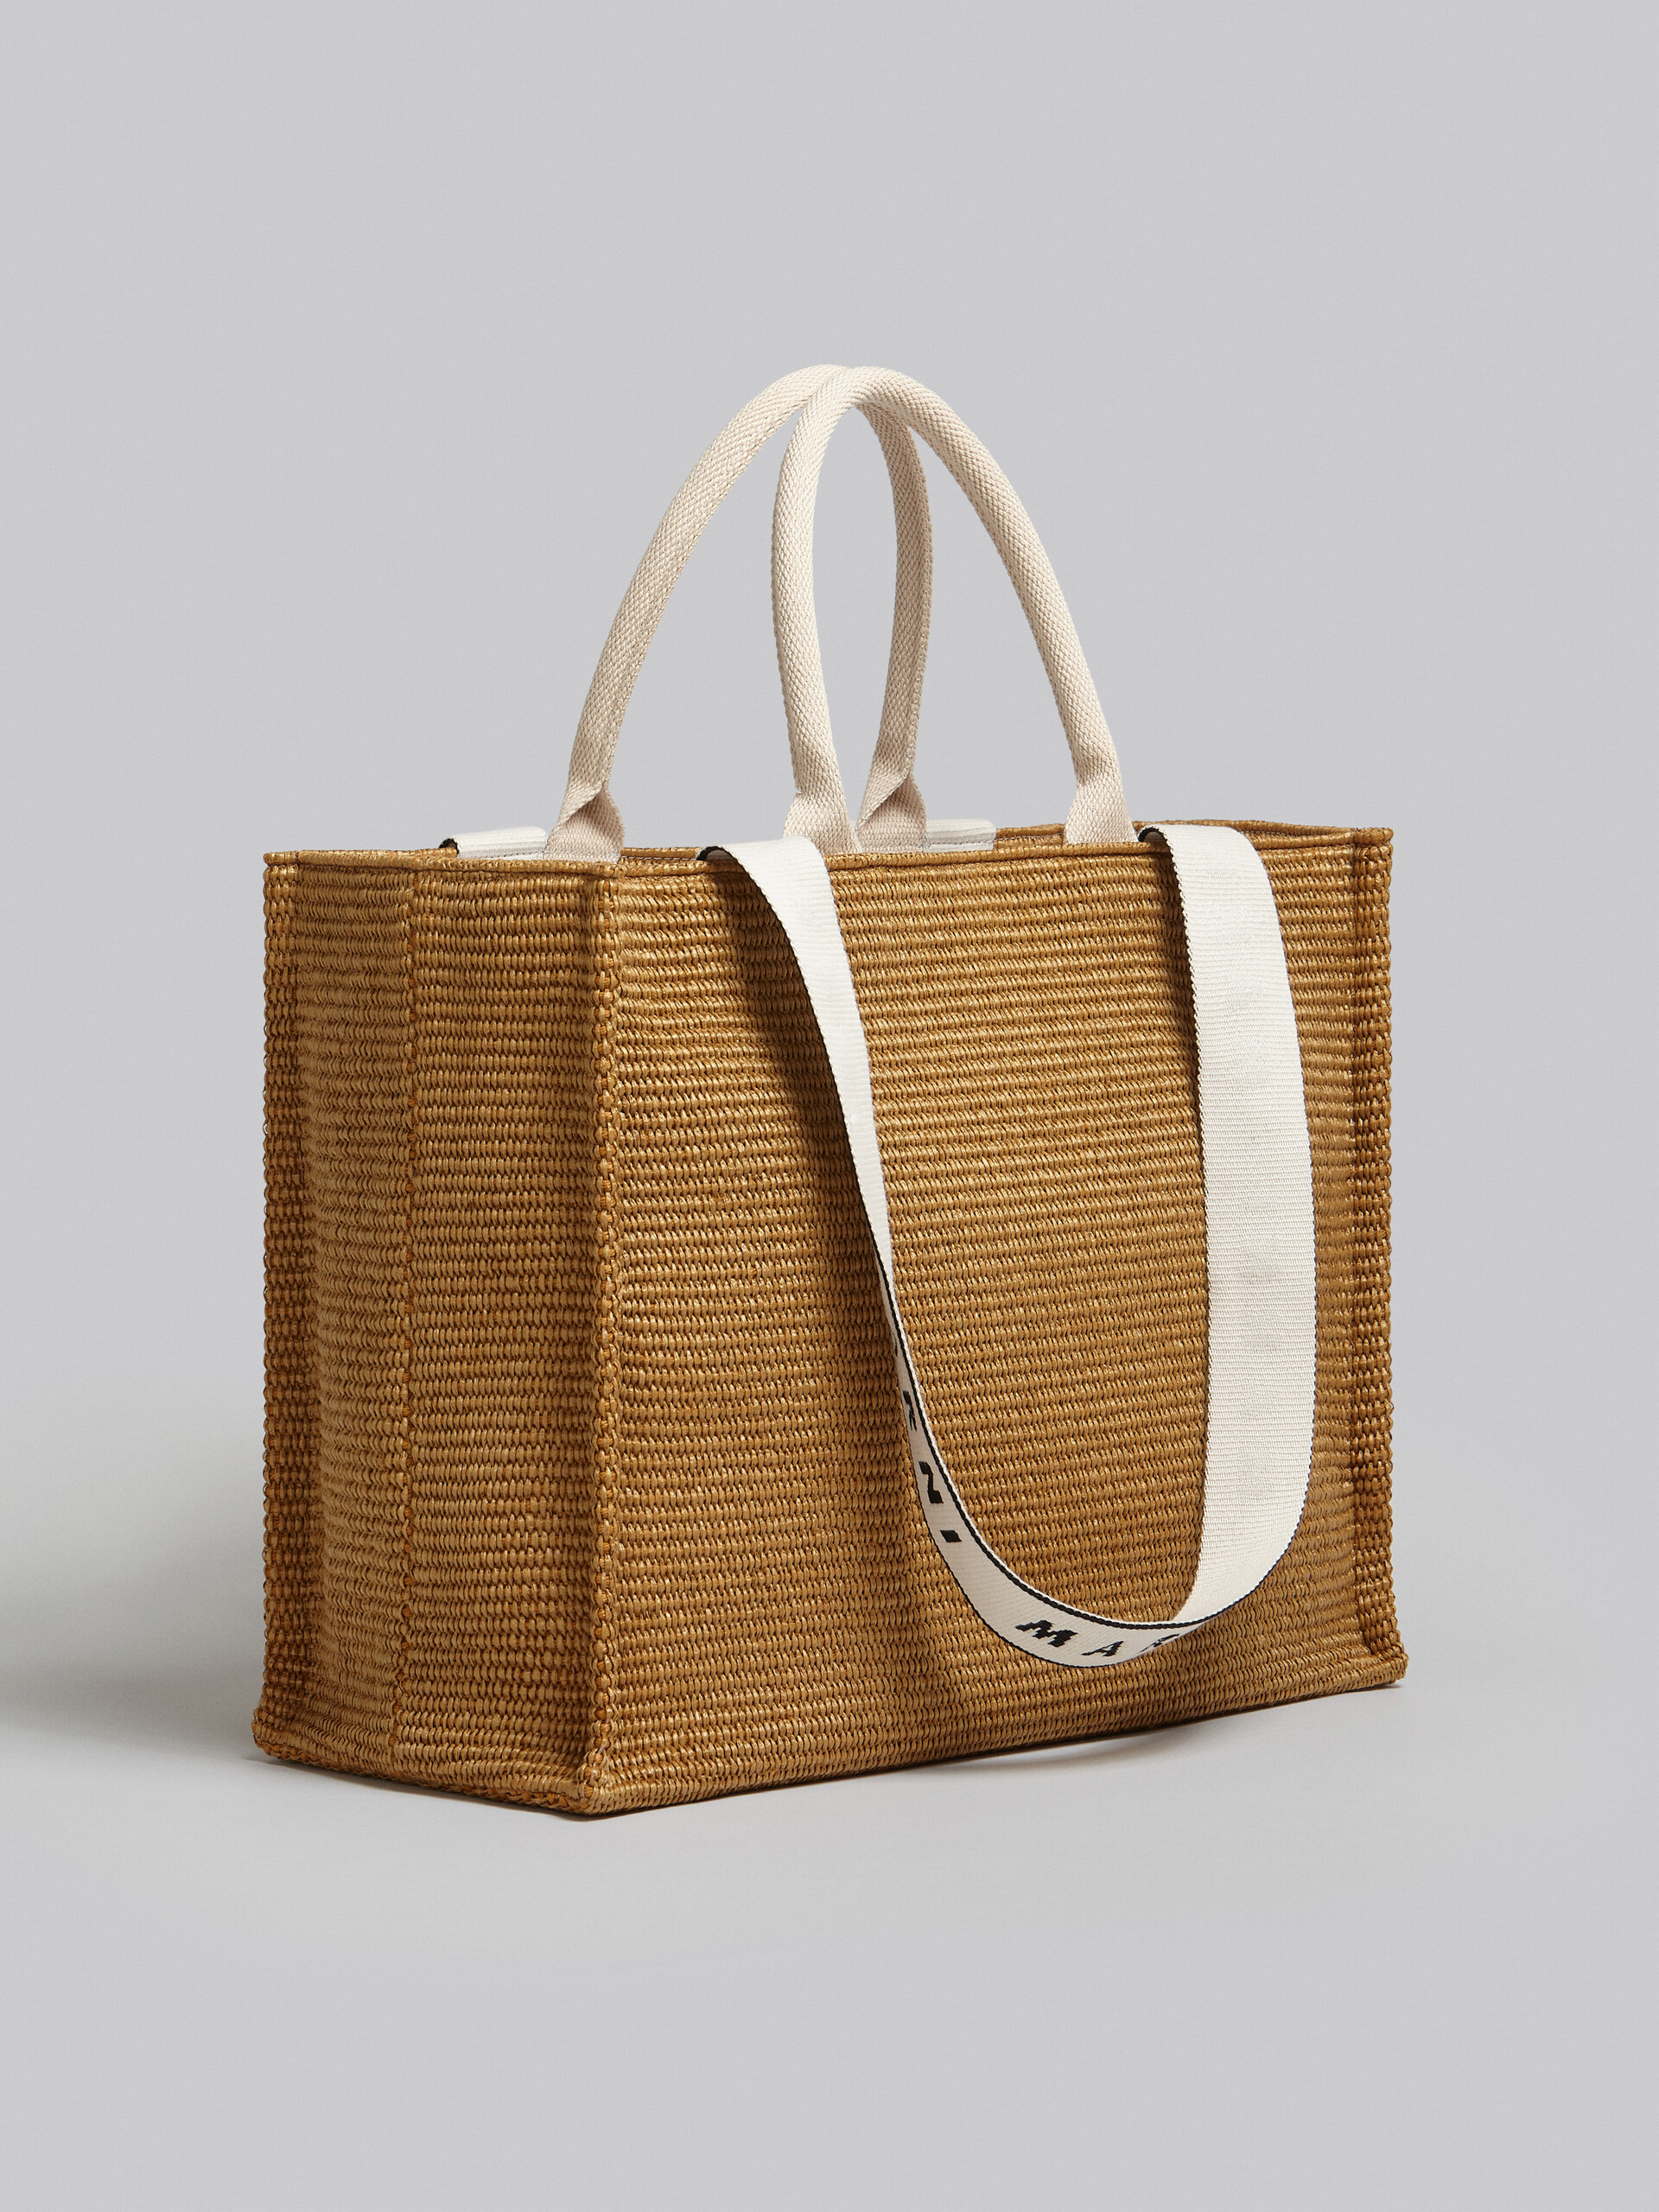 Bey tote Bag in brown raffia - Shopping Bags - Image 6